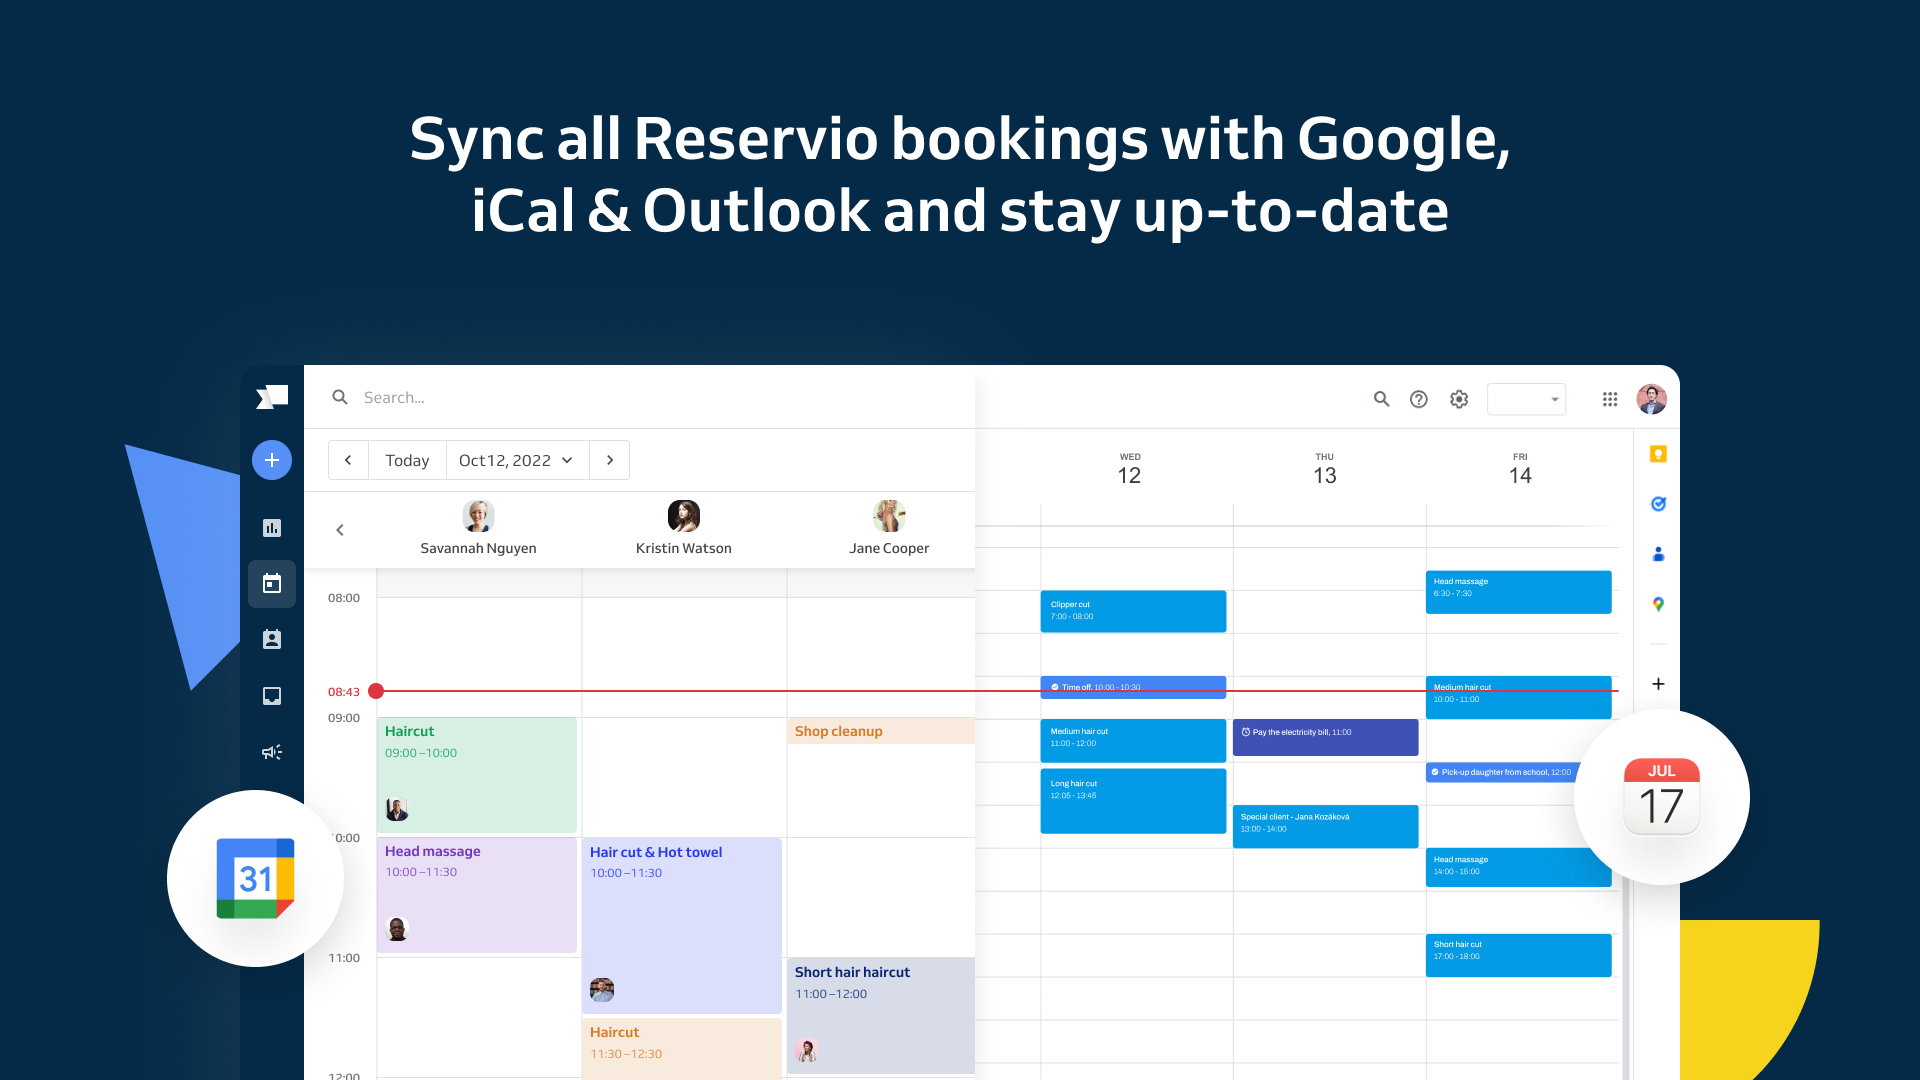 Sync all Reservio bookings with Google, iCal & Outlook and stay up-to-date